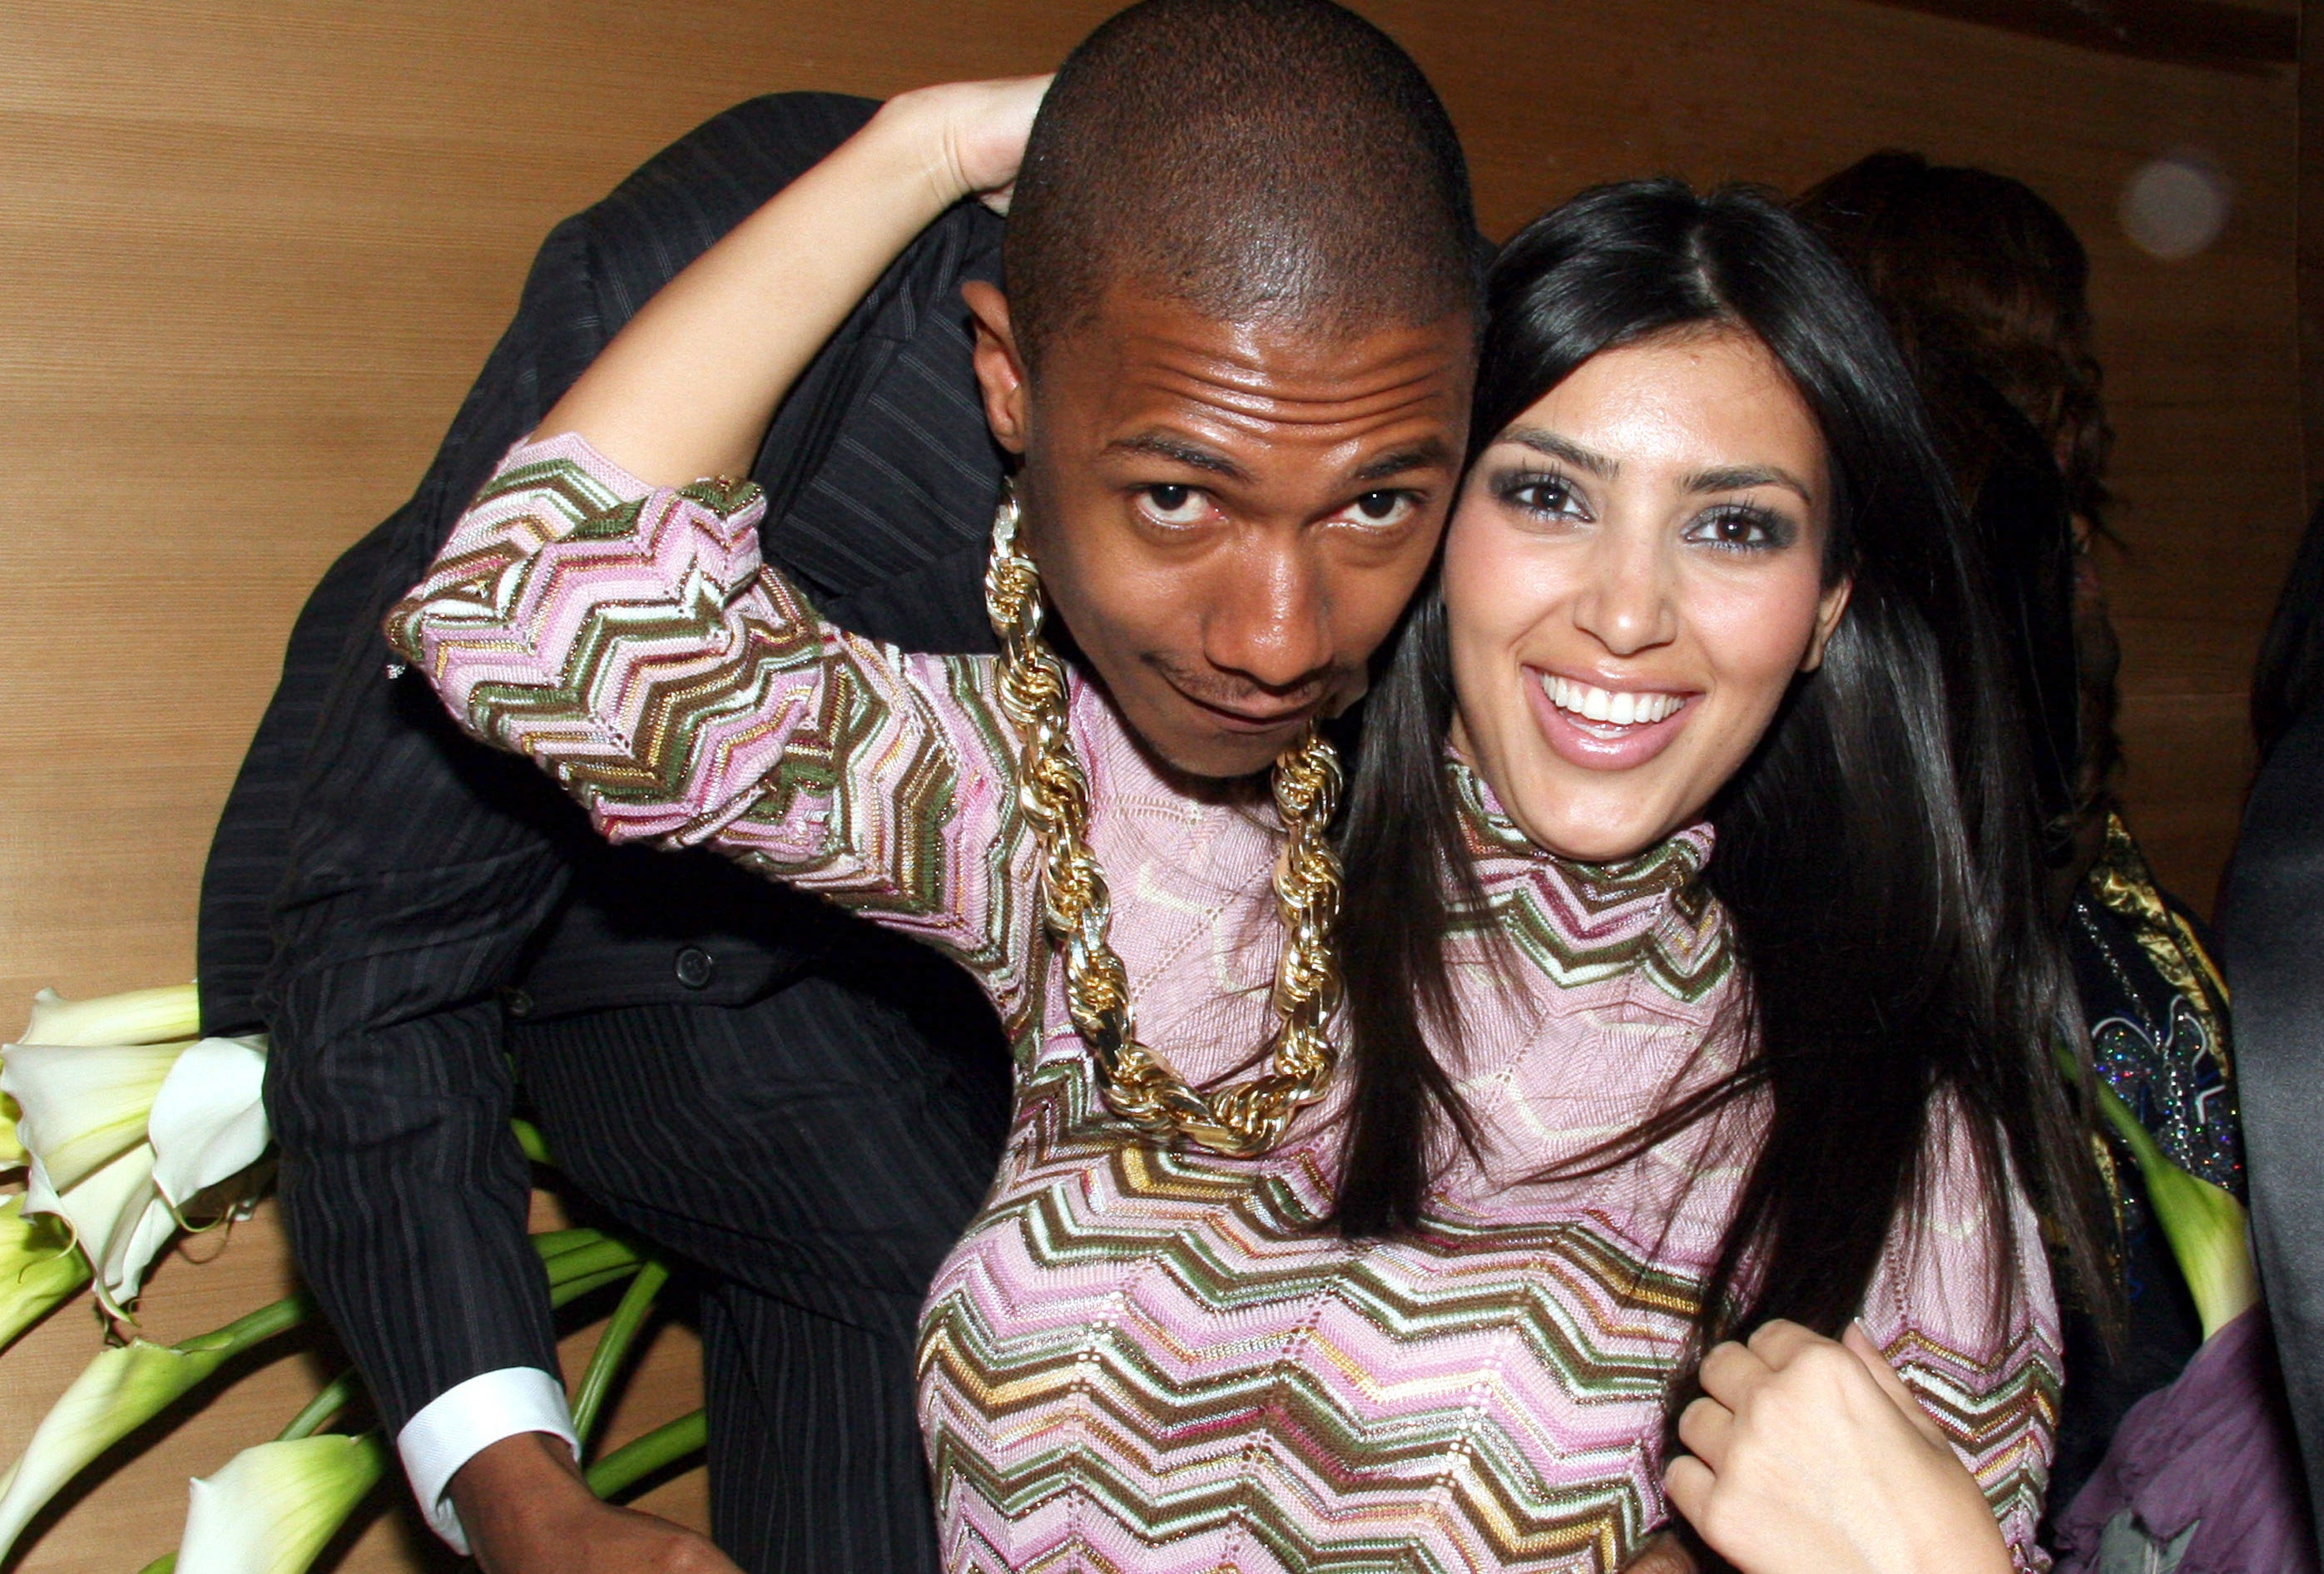 Nick Cannon and Kim Kardashian posing for a picture together